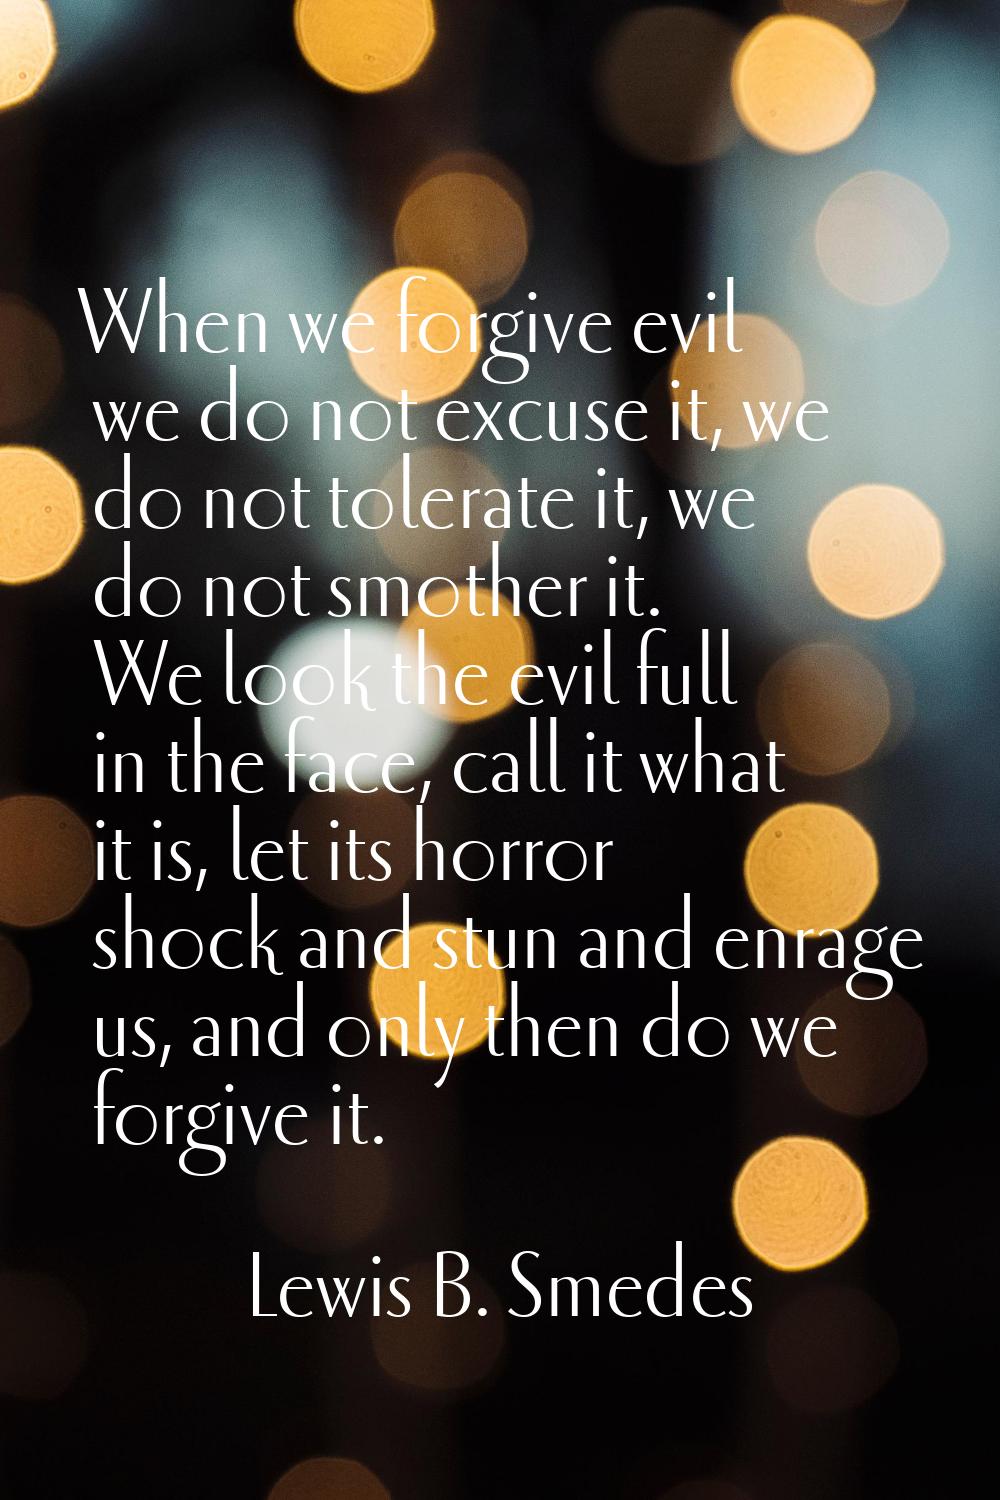 When we forgive evil we do not excuse it, we do not tolerate it, we do not smother it. We look the 